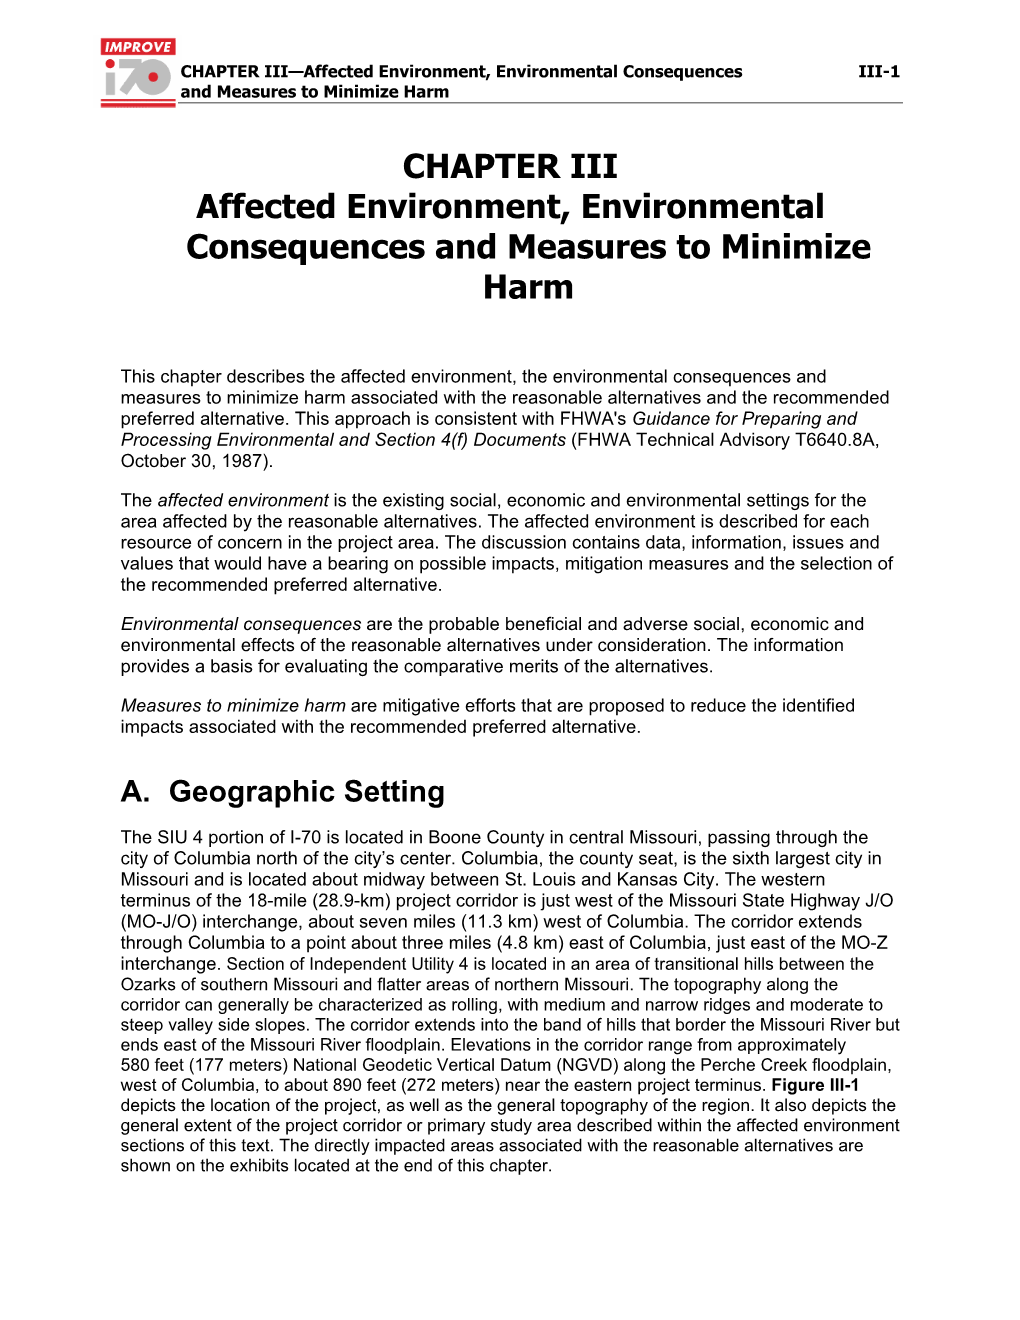 CHAPTER III Affected Environment, Environmental Consequences and Measures to Minimize Harm